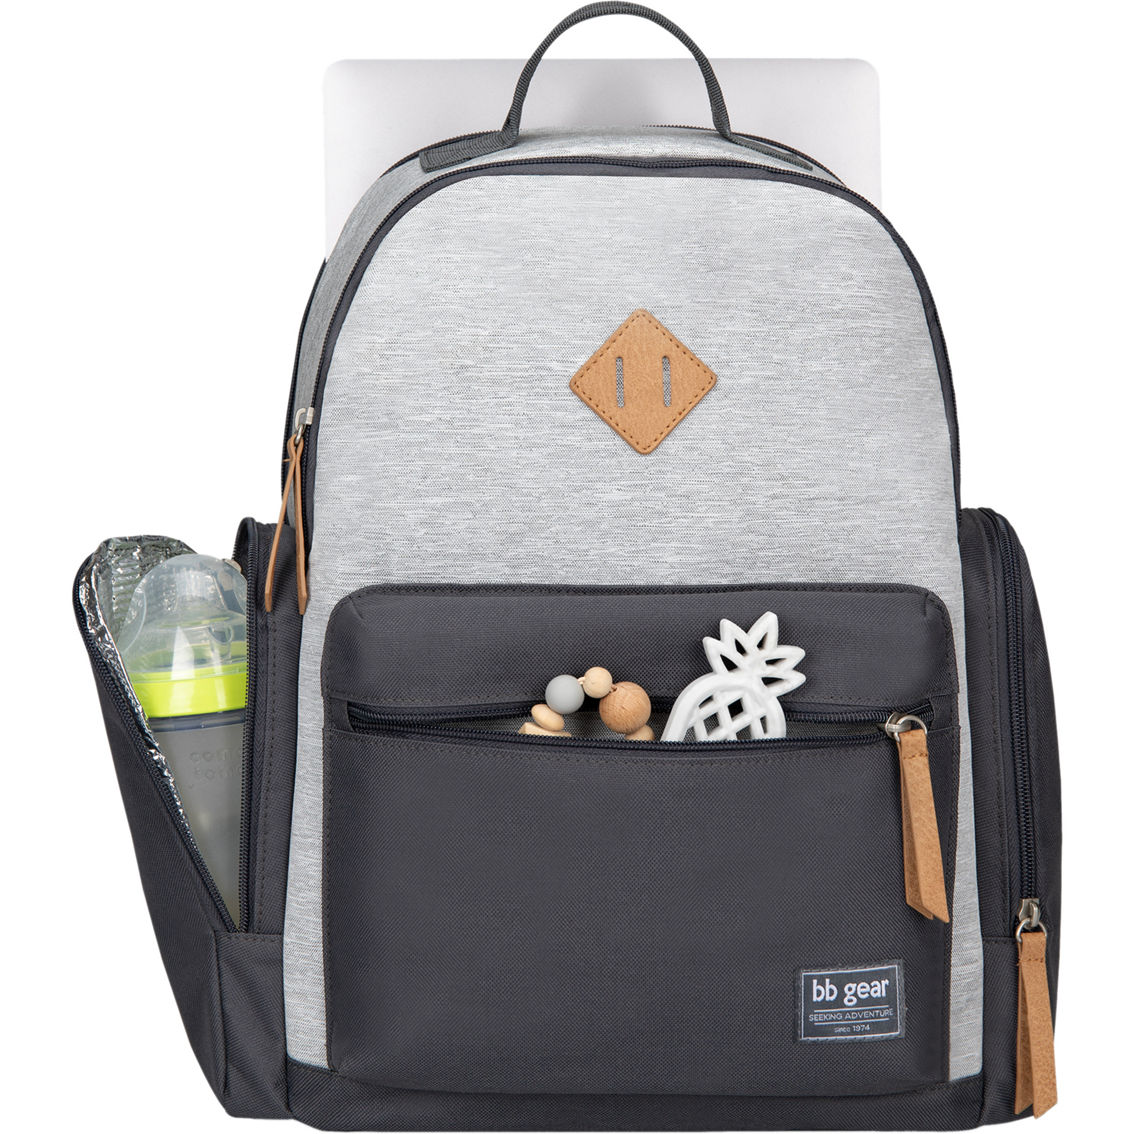 Baby Boom Gear Stonescape Backpack Diaper Bag - Image 5 of 7